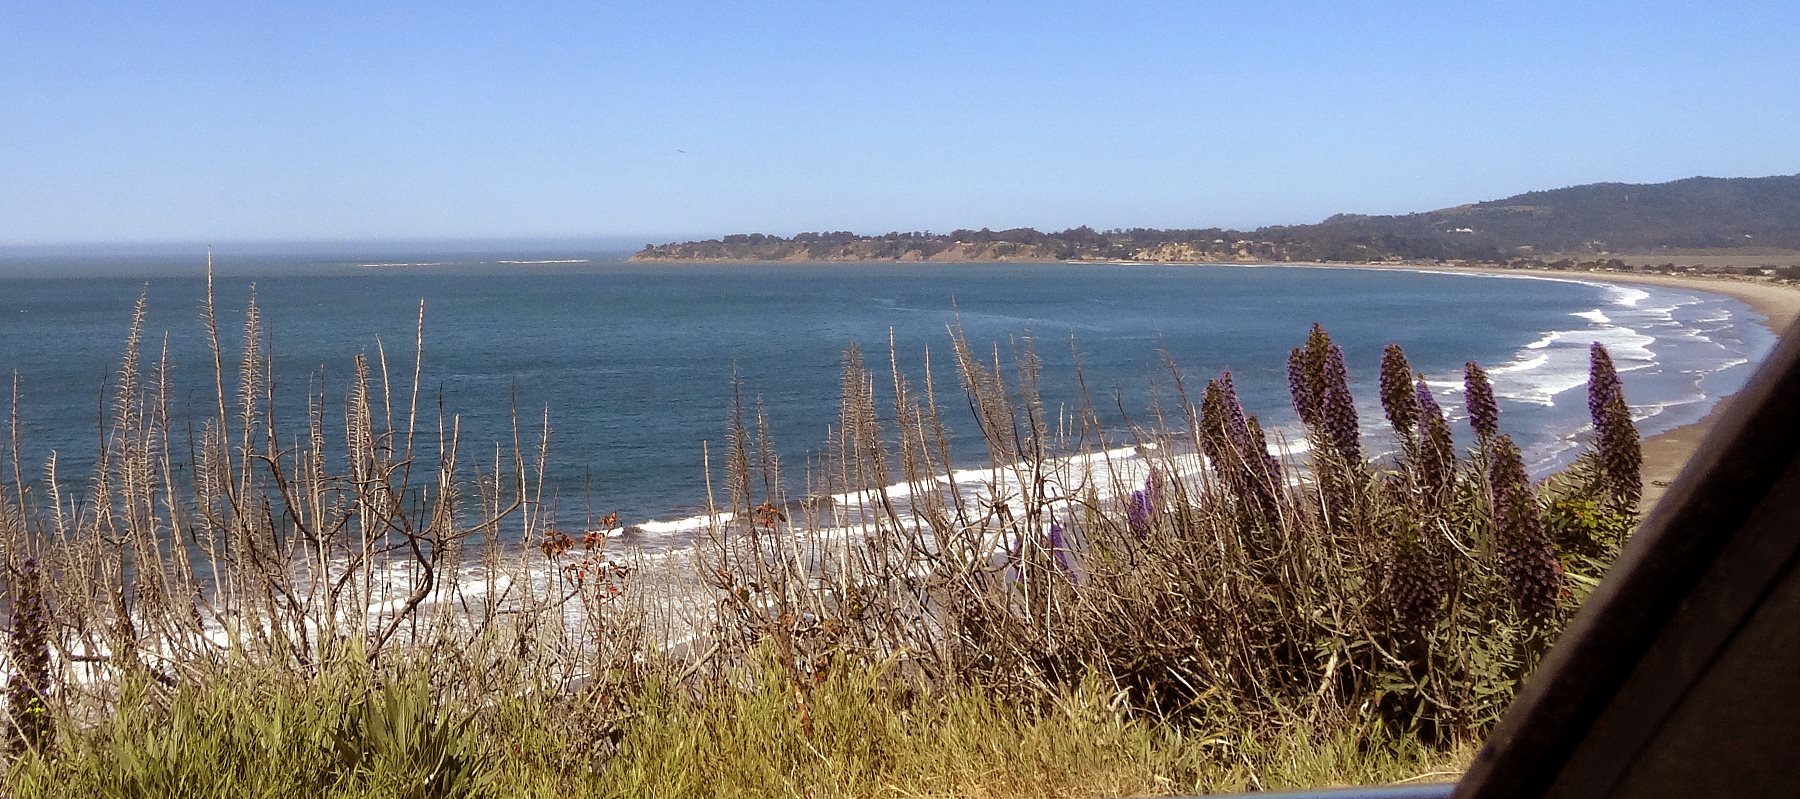 That is Stinson Beach. I guess this is Bolinas Bay inside of Drakes Bay if you consider everything inside of Point Reyes to San Francisco be Drakes Bay. It's about 40 miles across.